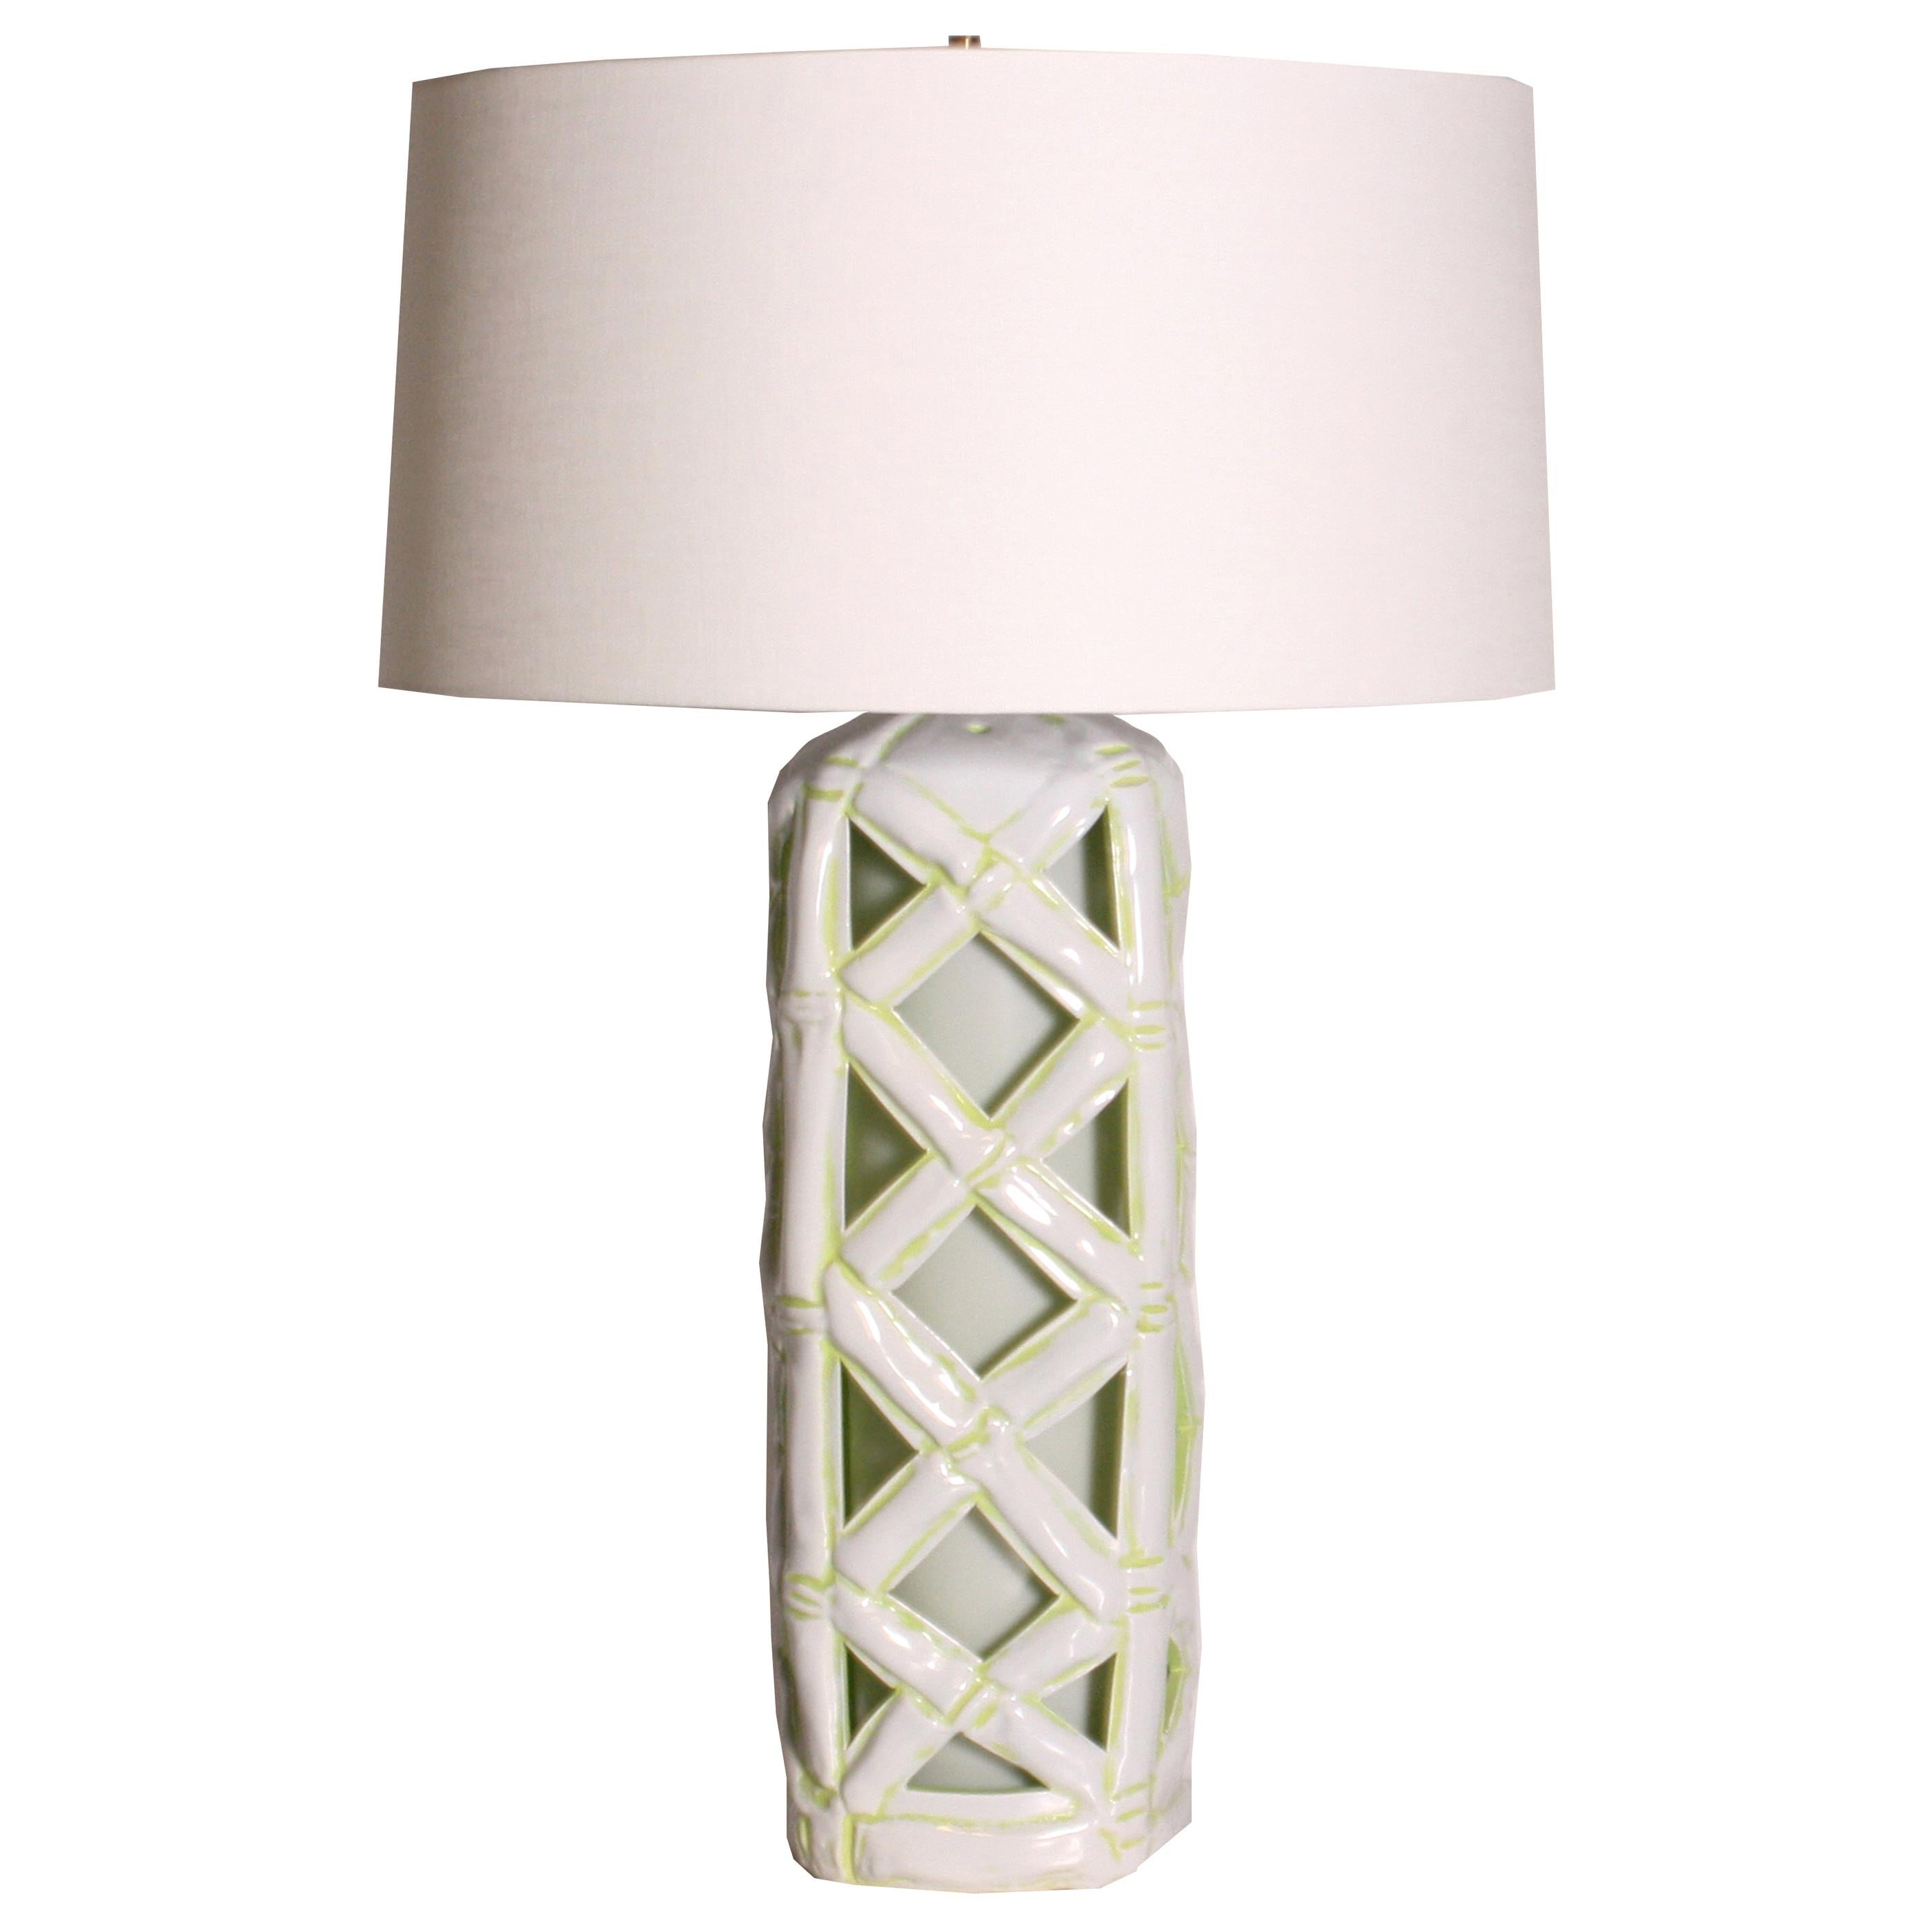 Ceramic Faux Bamboo Lamp, c. 1960 For Sale